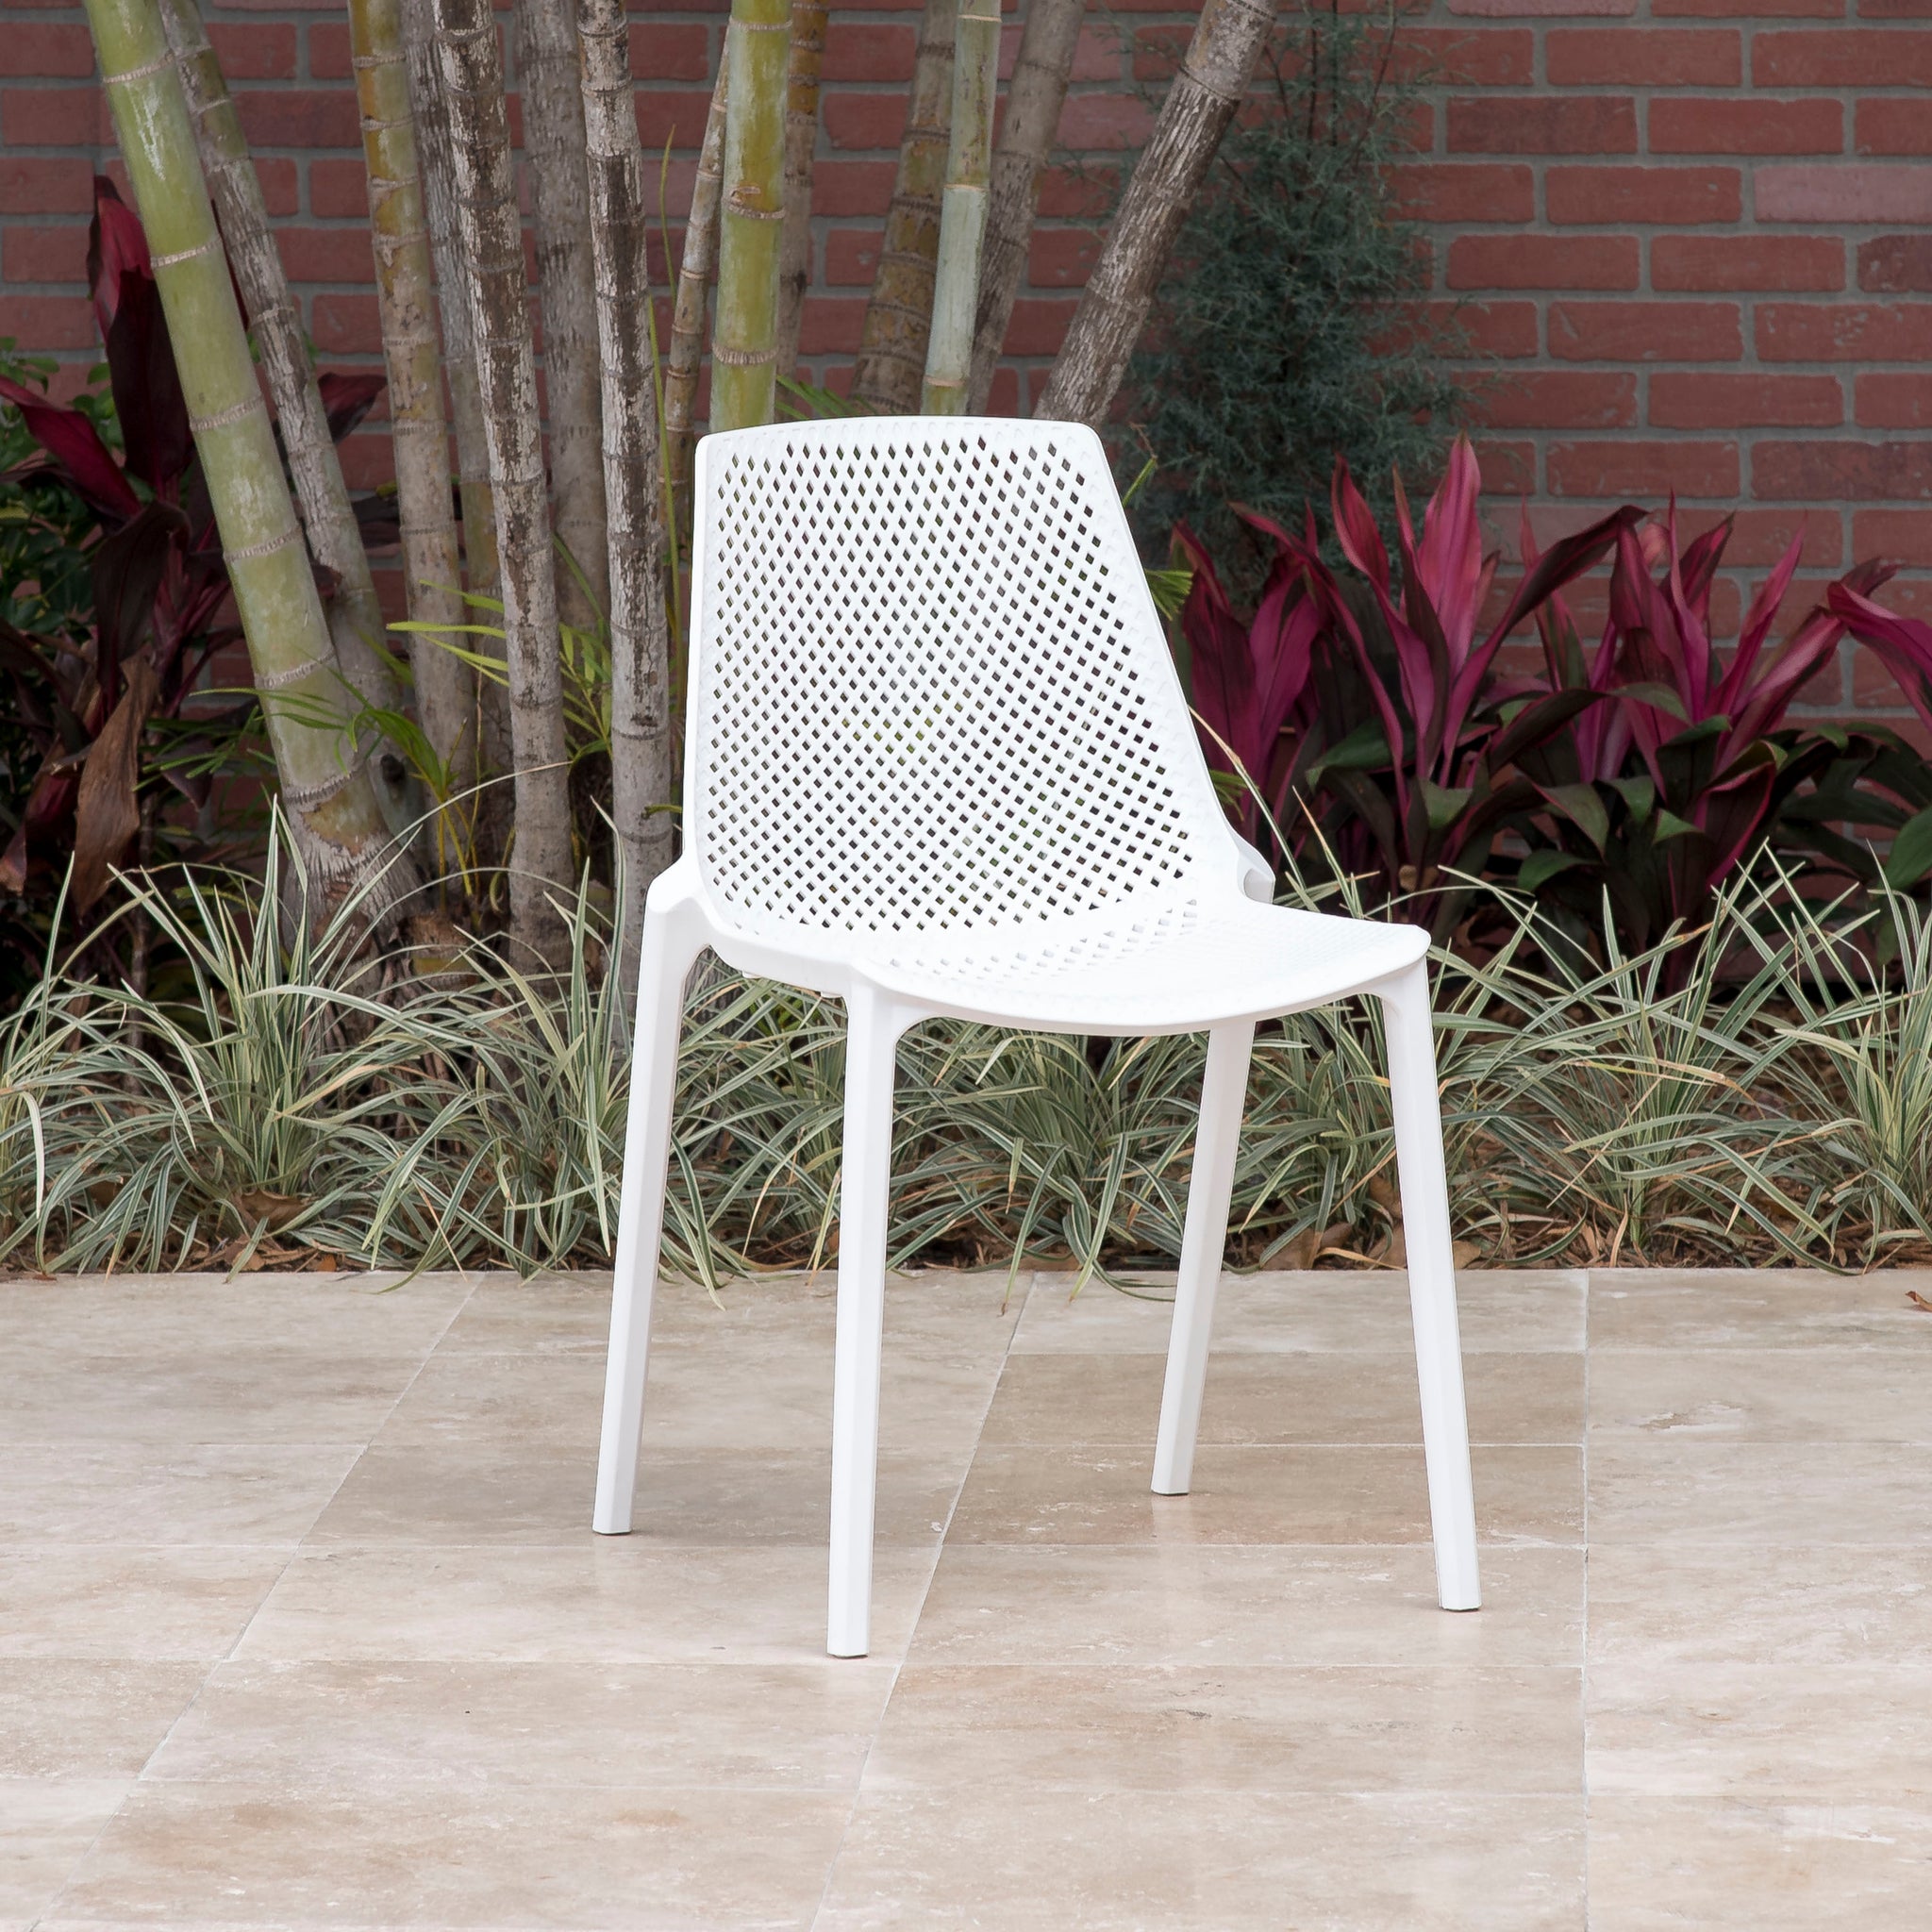 Valencia Grey Stacking Outdoor Dining Chair - 4PC